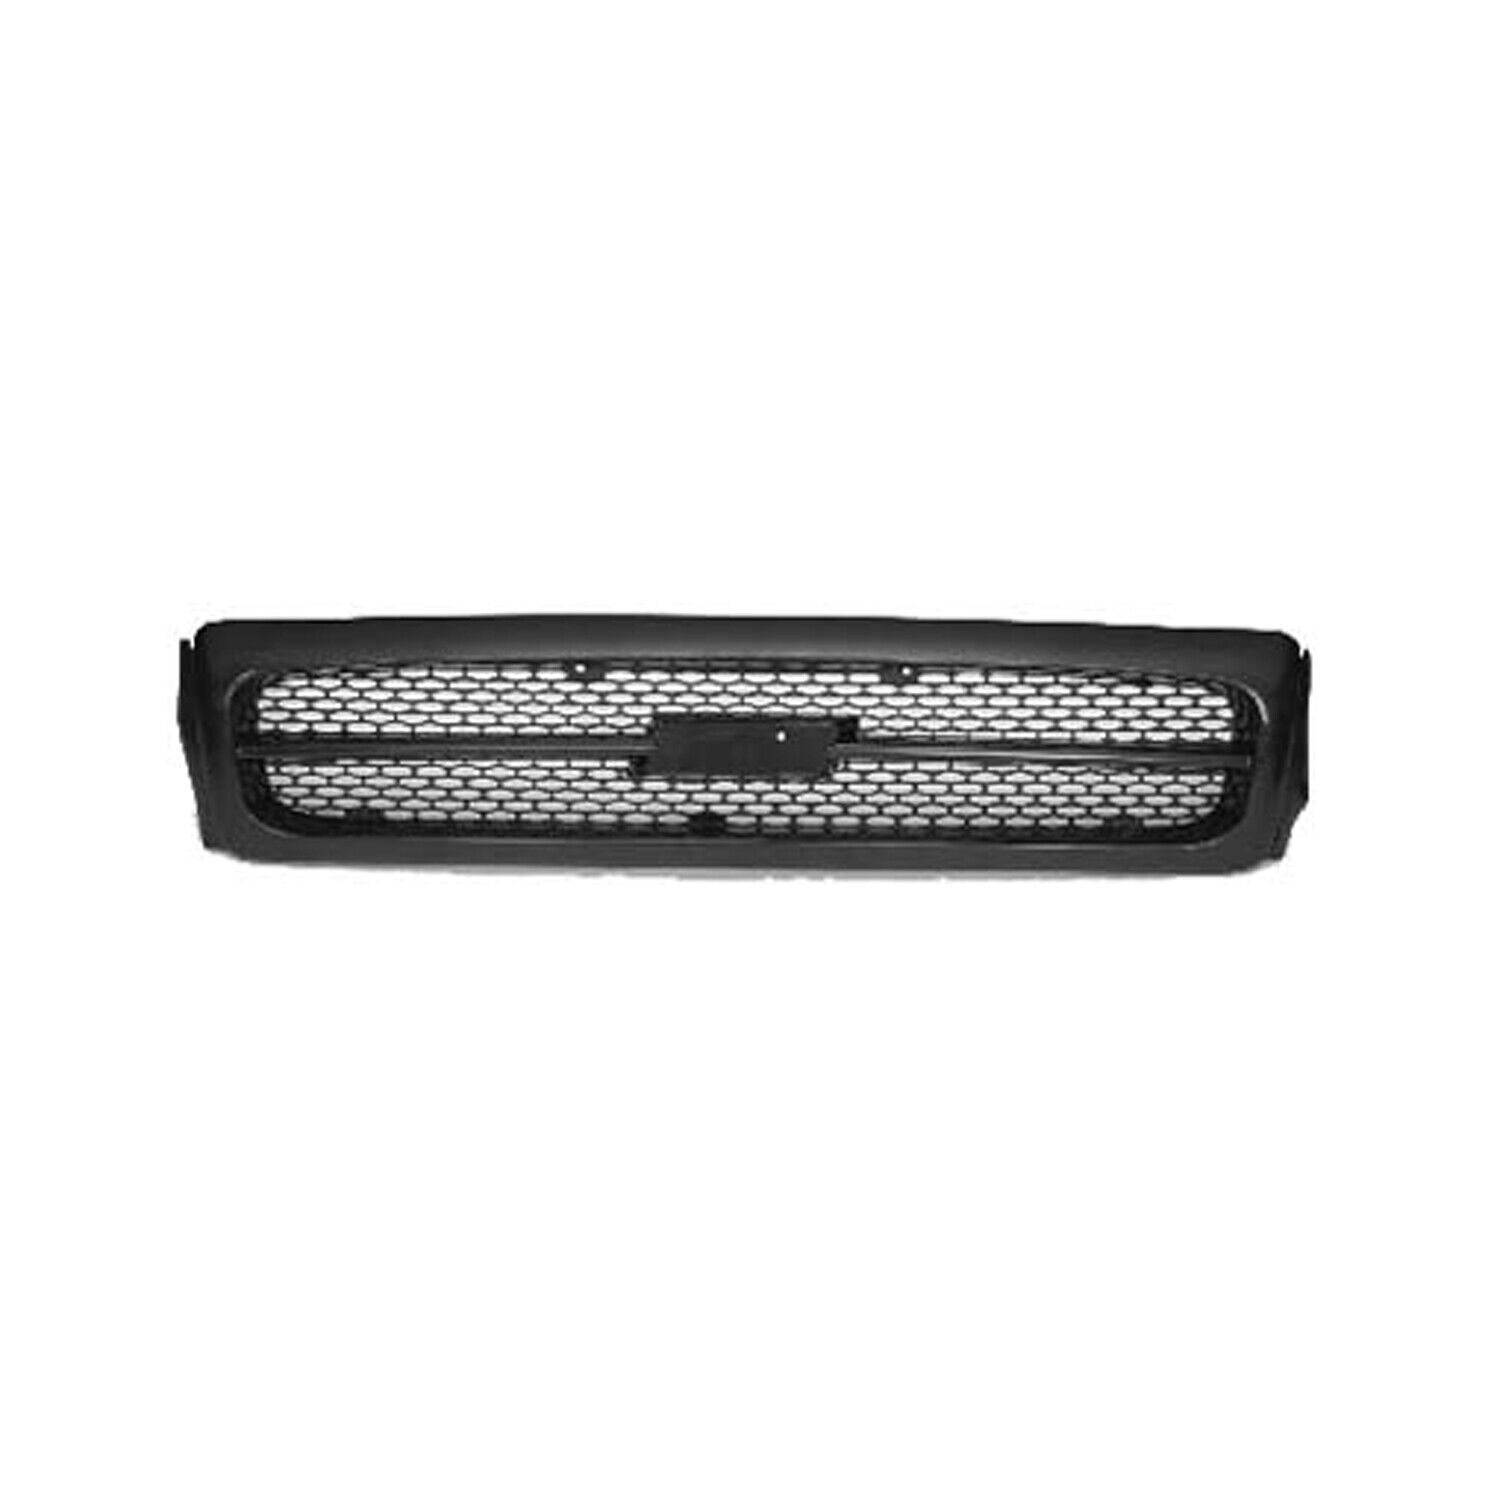 GM1200450 New Grille Fits 1994-1996 Chevrolet Impala SS